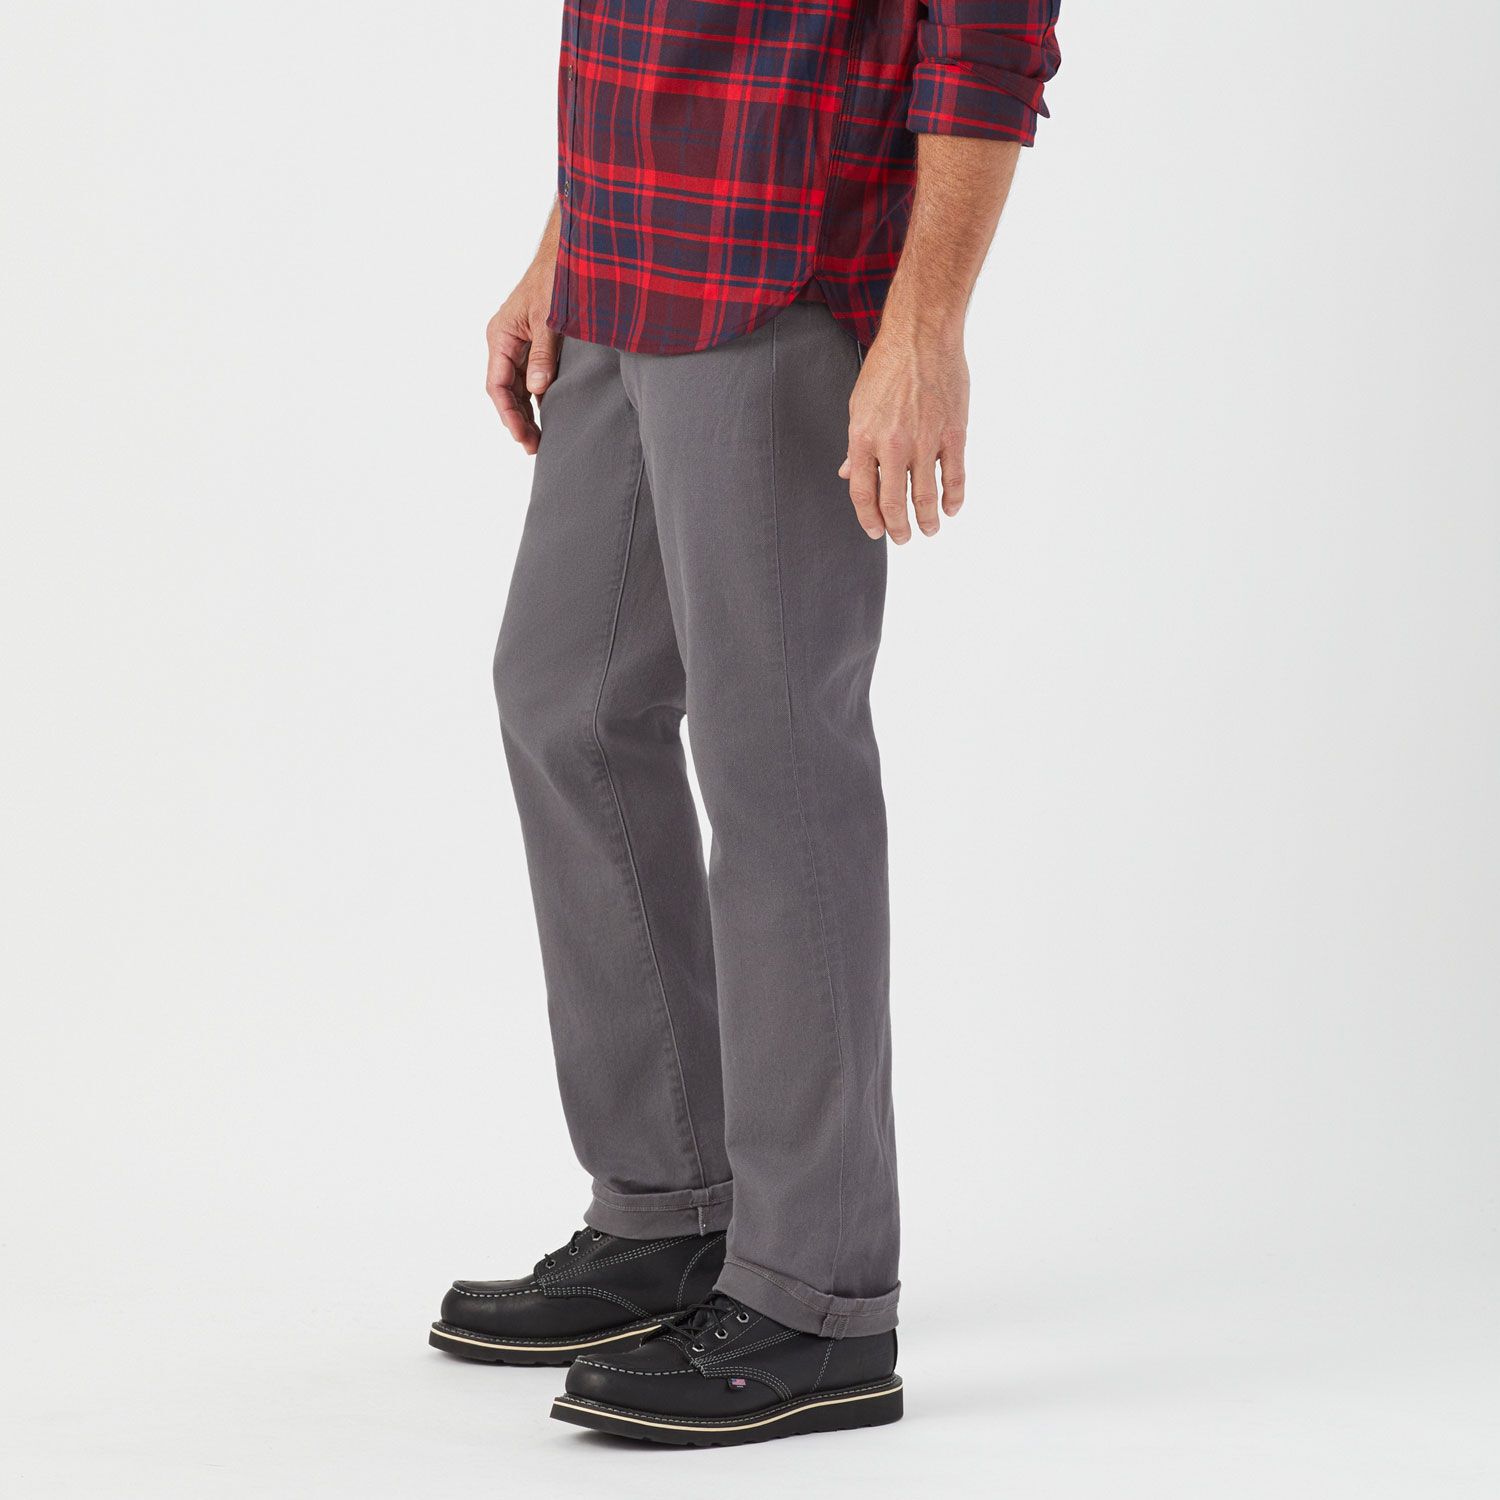 Men's Best Made 5-Pocket Twill Pants | Duluth Trading Company